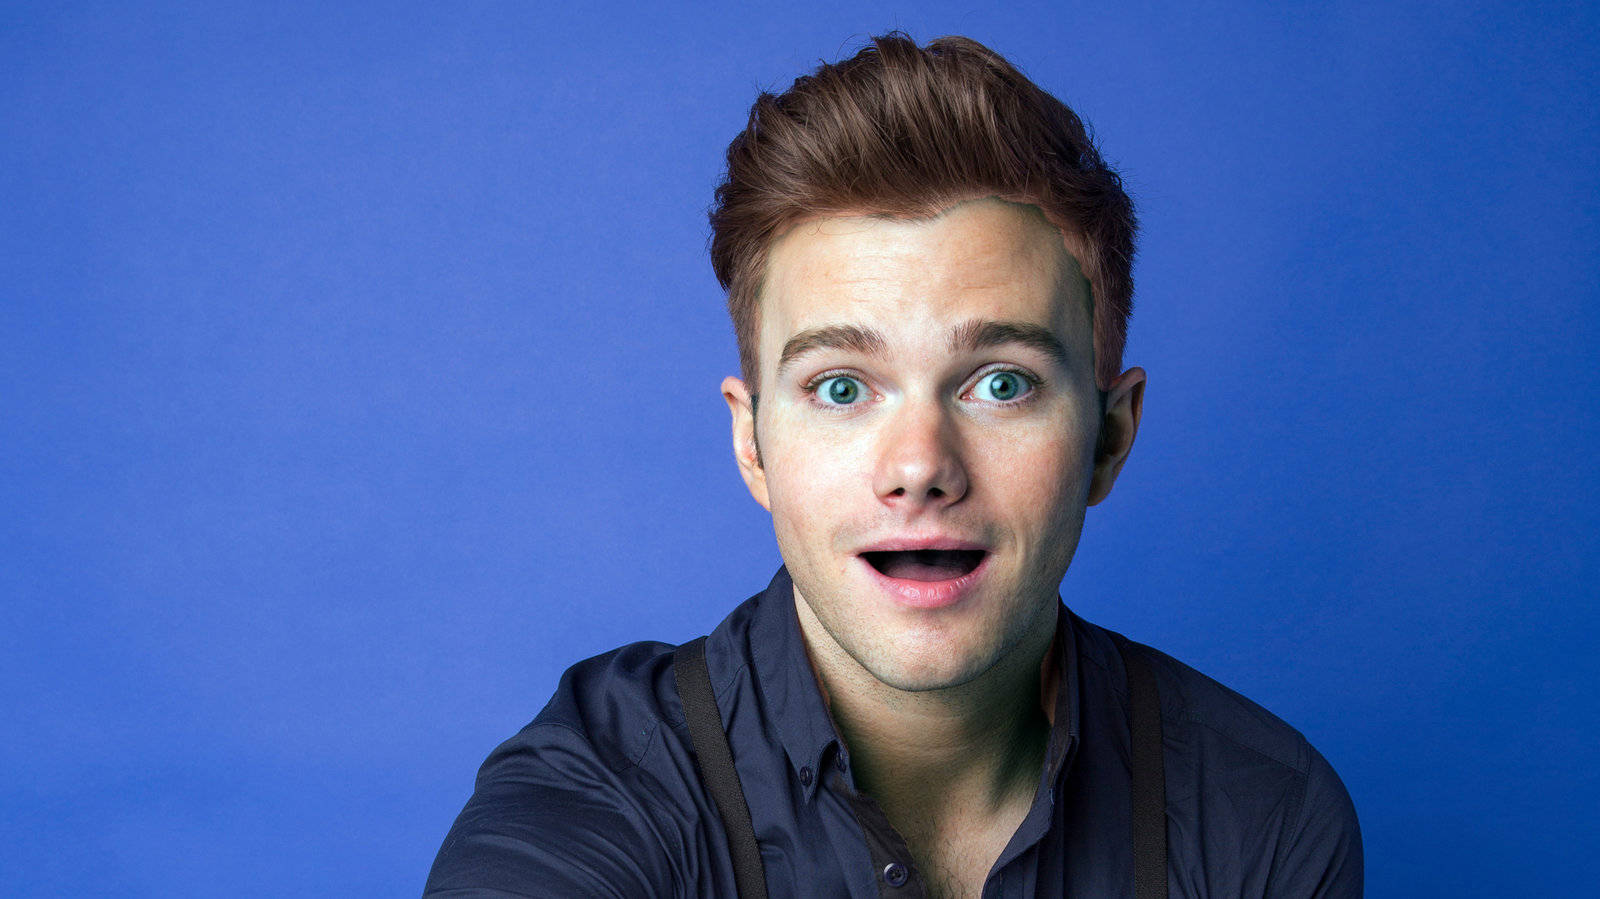 Quirky Chris Colfer Wallpaper